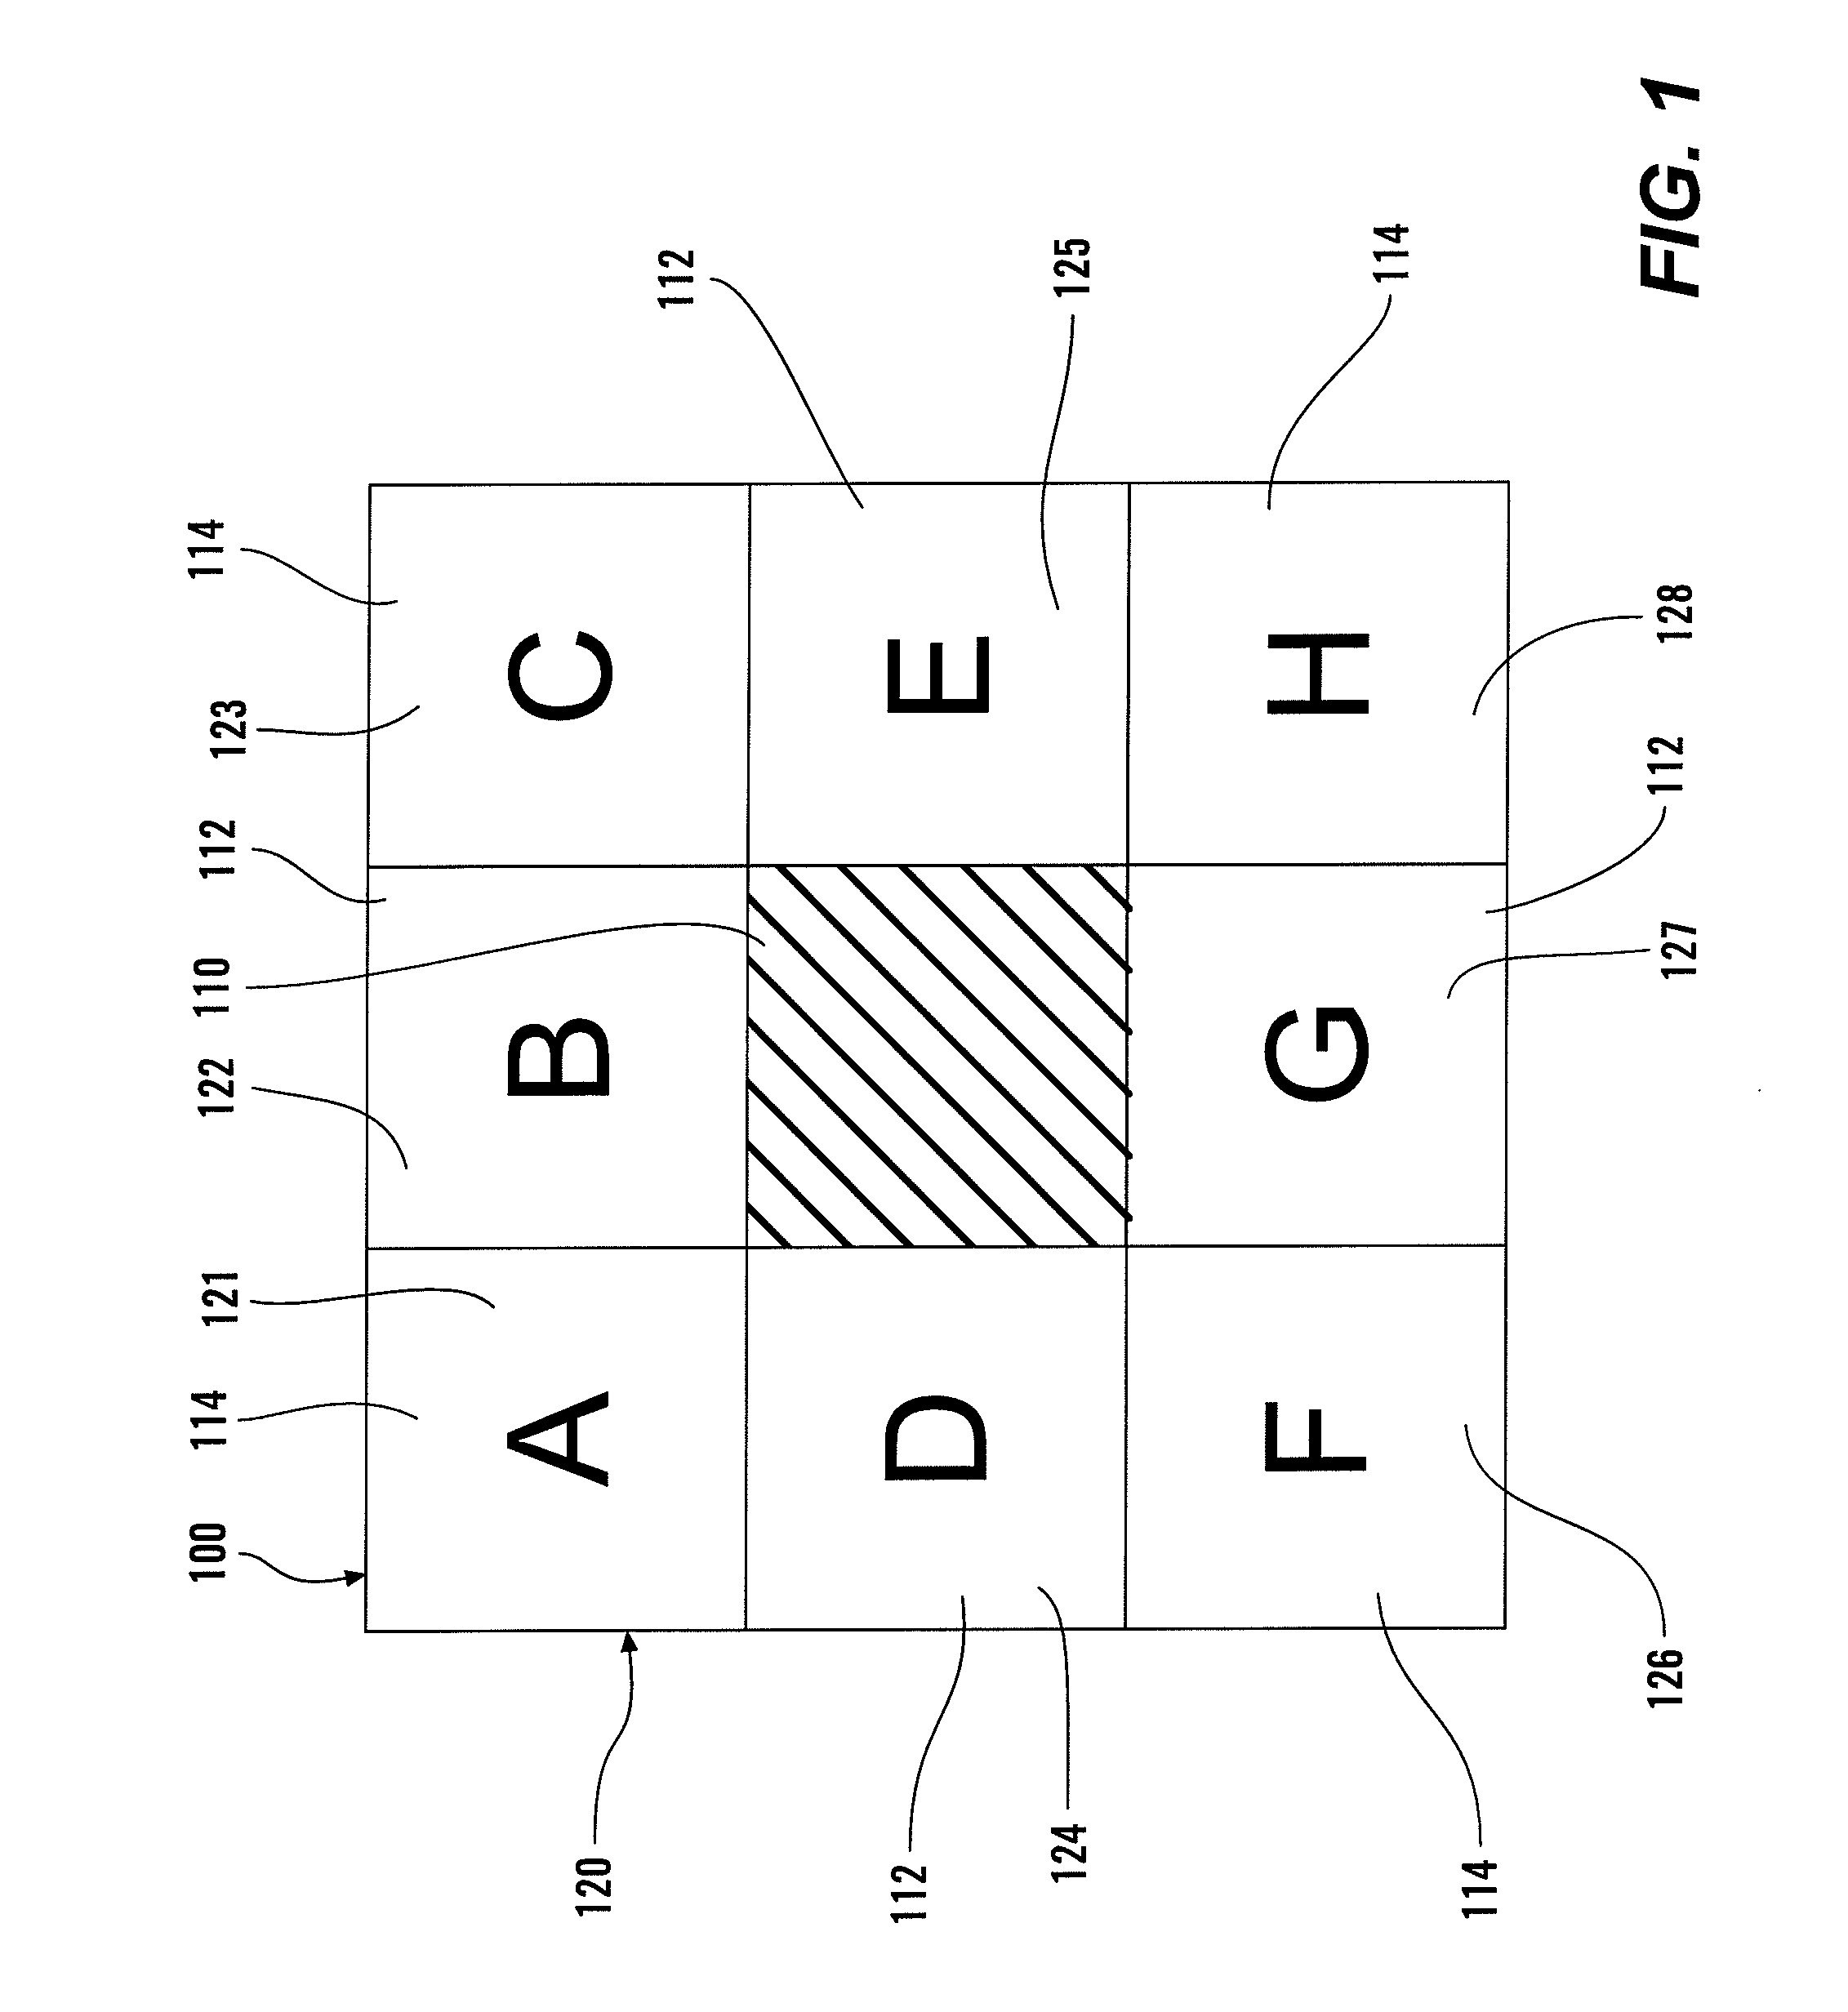 Systems and methods for generating and displaying a warped image using fish eye warping